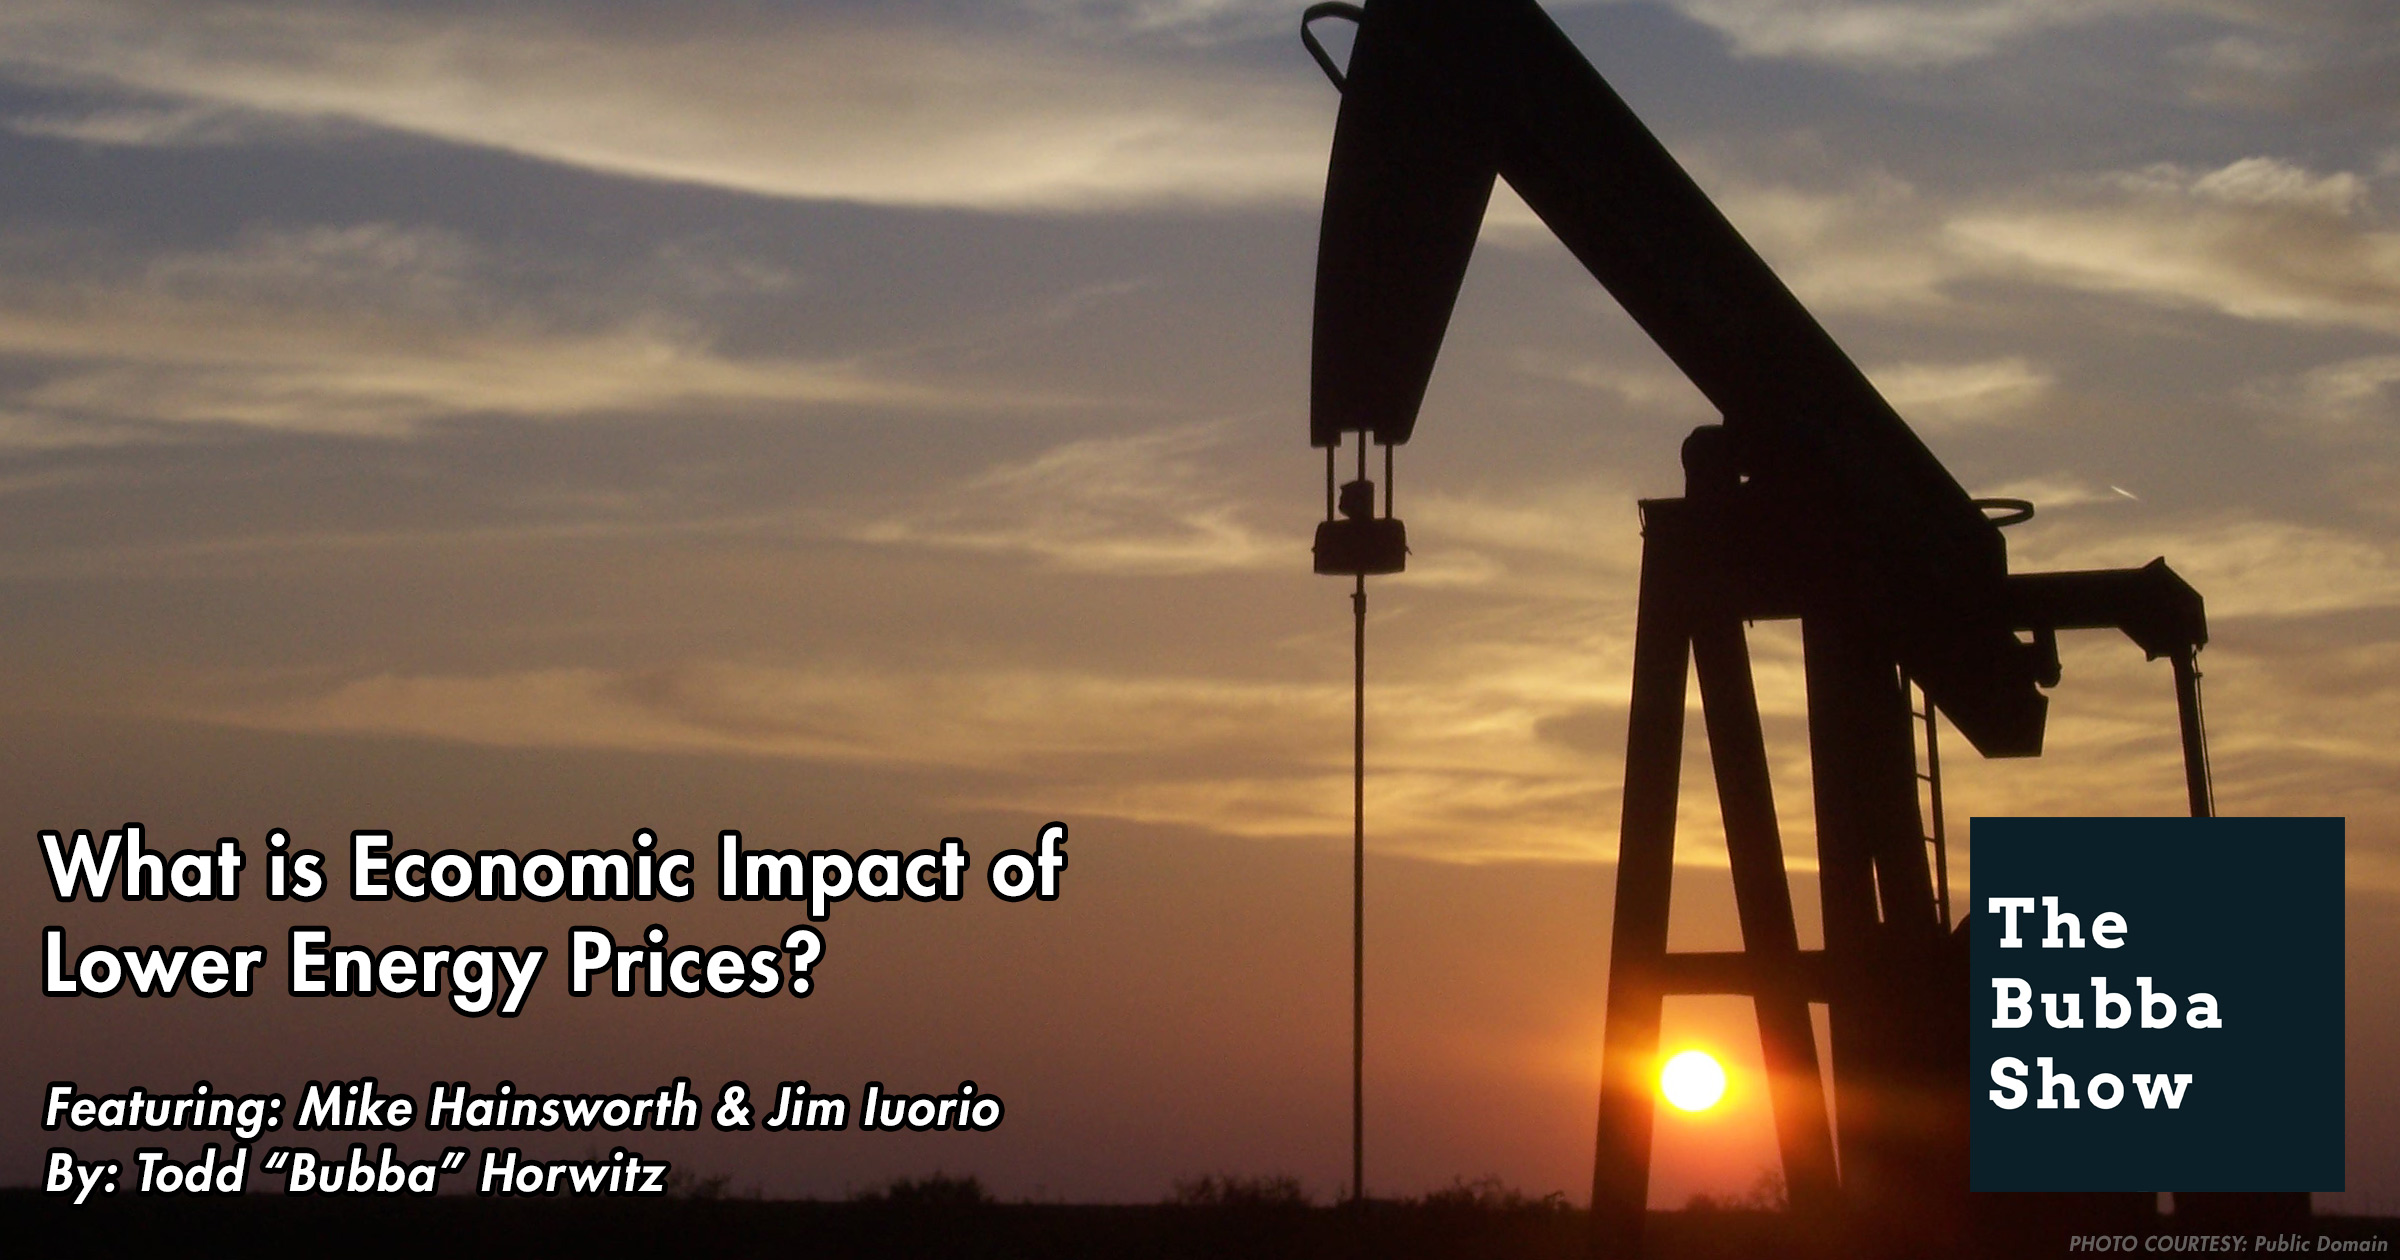 Economic Impact of Lower Energy Prices FEATURED